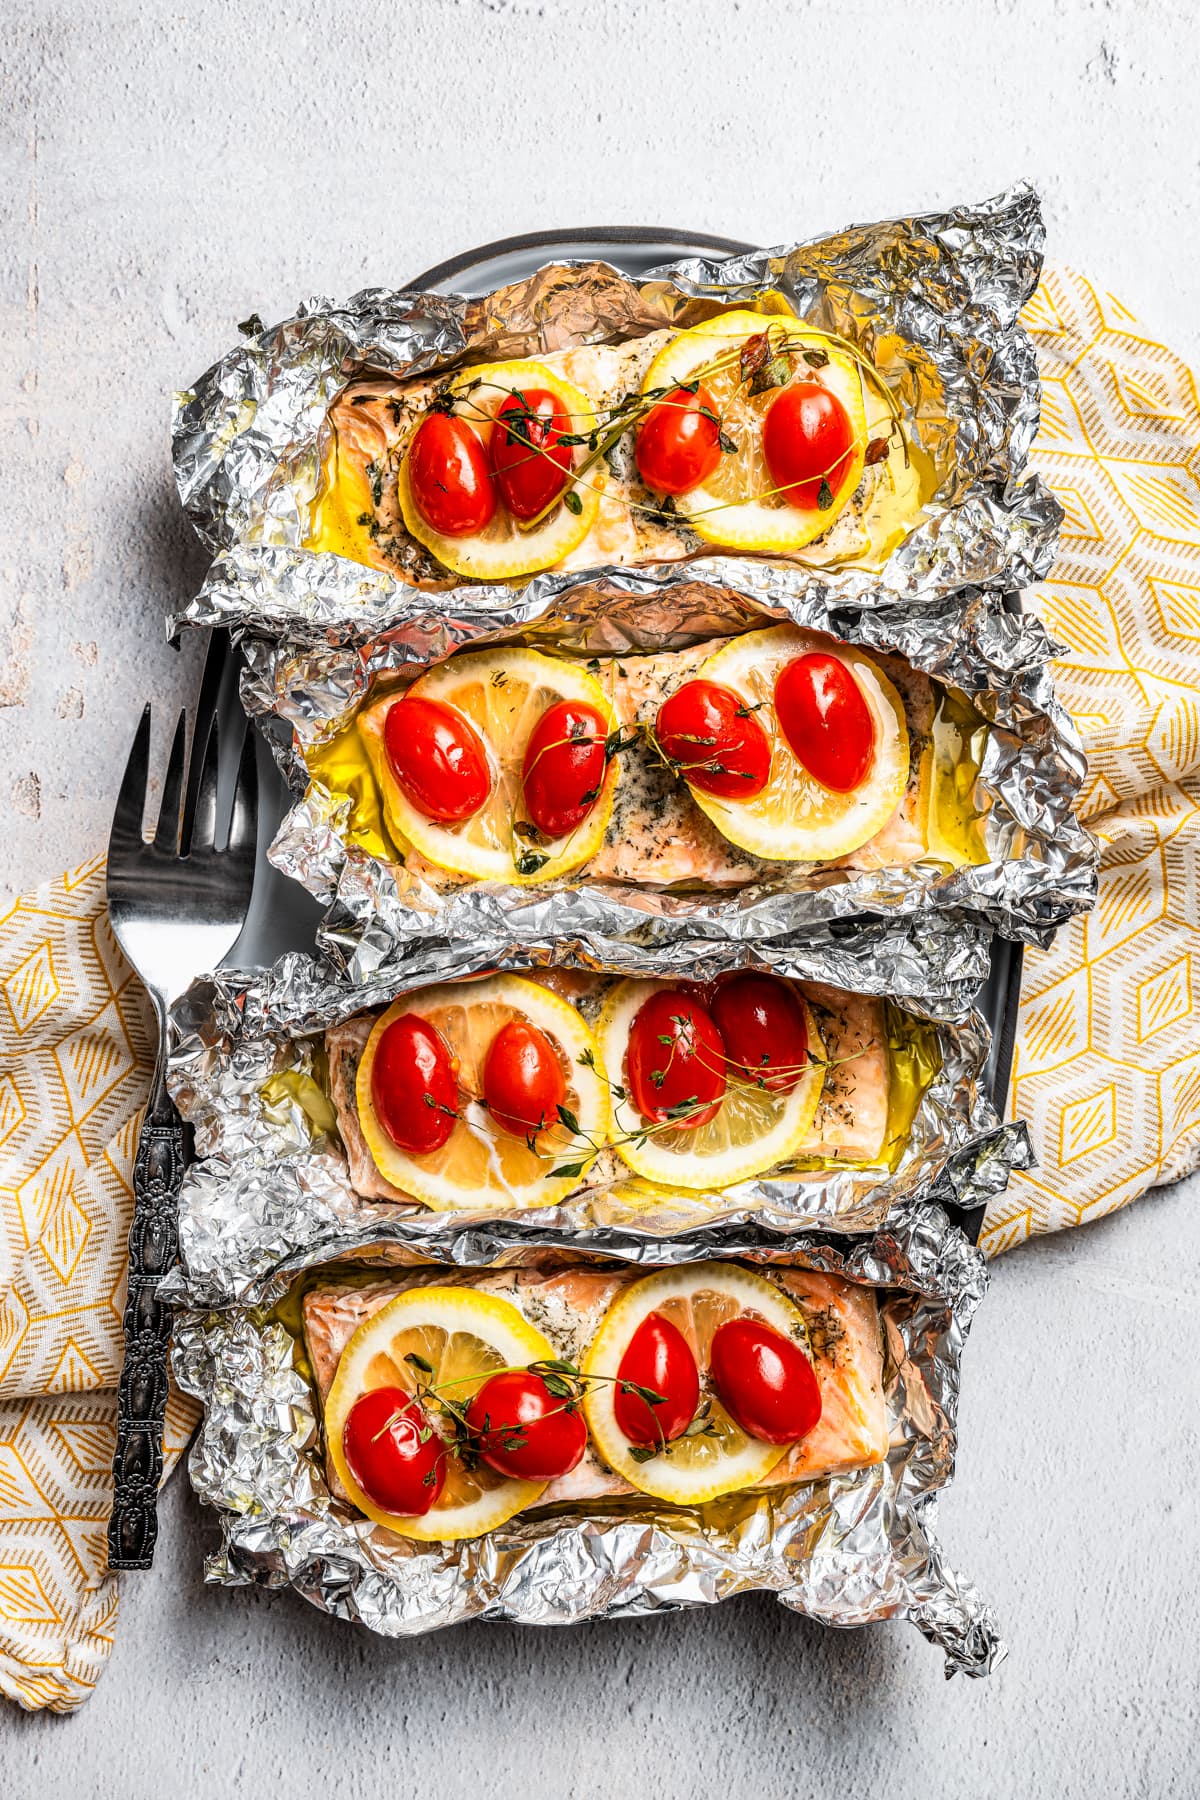 Overhead view of baked lemon pepper salmon filets topped with lemon slices, tomatoes, and thyme inside unwrapped foil packets.